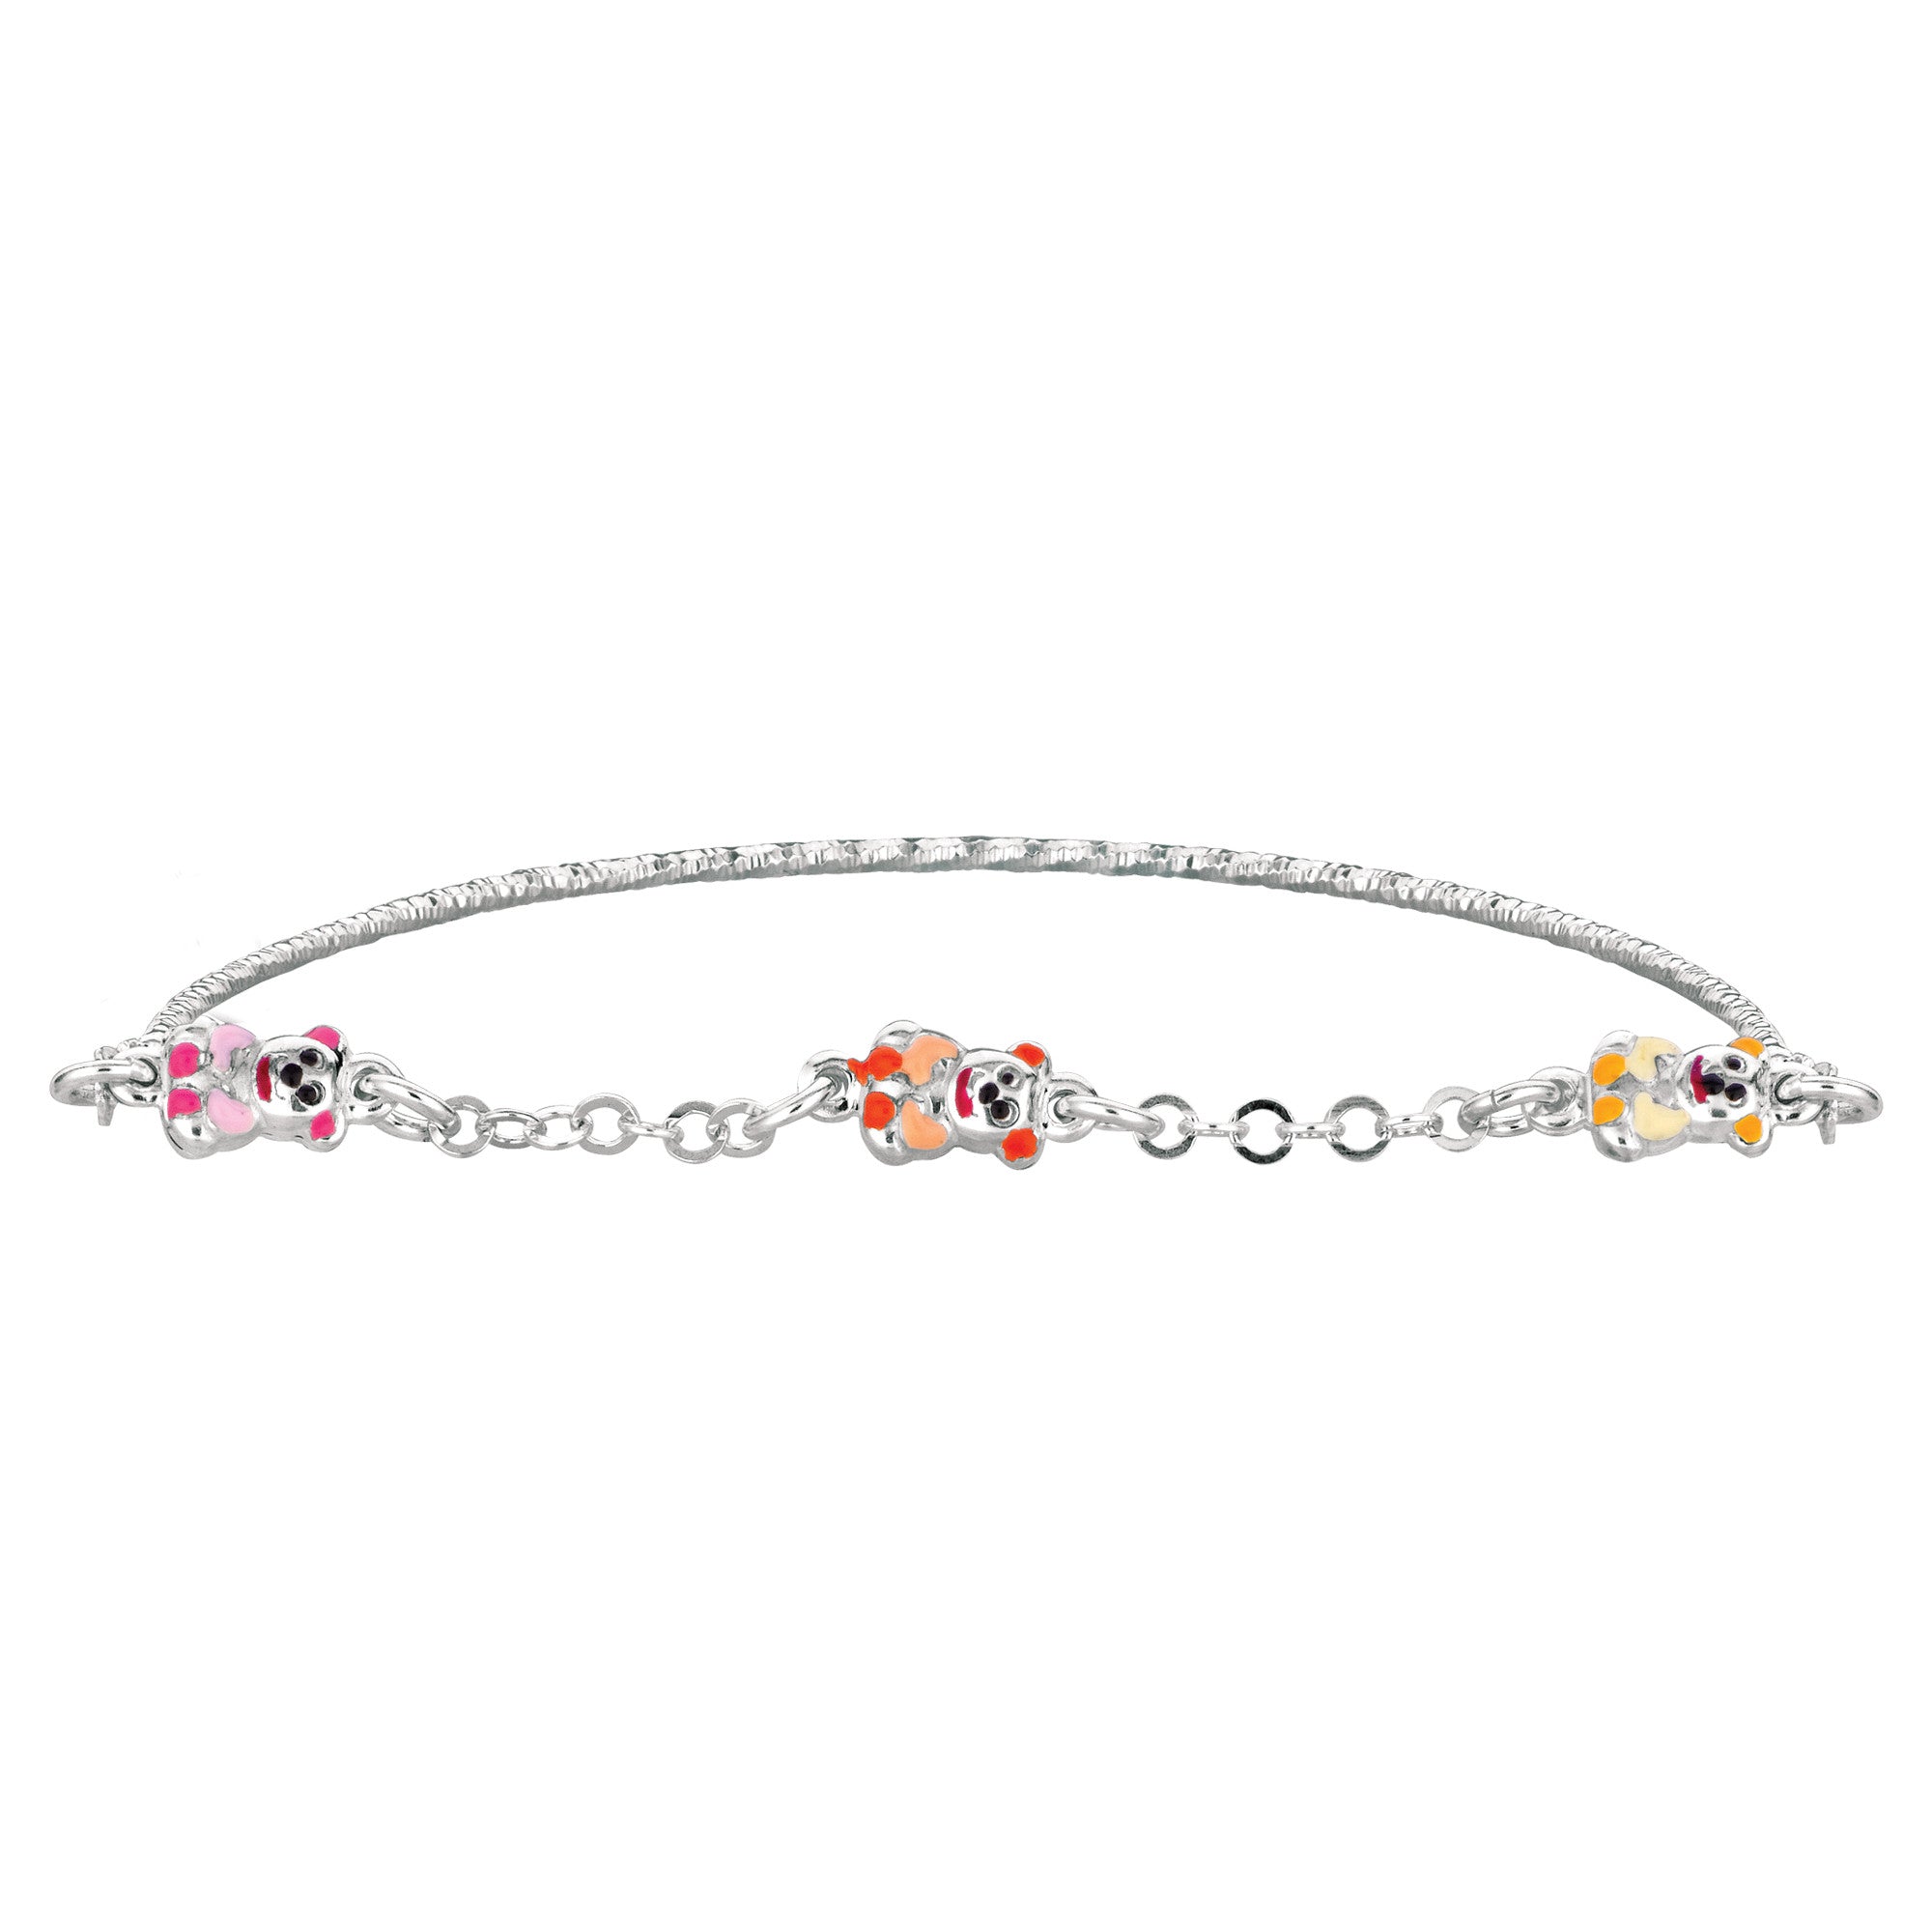 Baby Bangle Bracelet With Teddy Bear Enameled Charms In Sterling Silver - 5.5 Inch - JewelryAffairs
 - 1